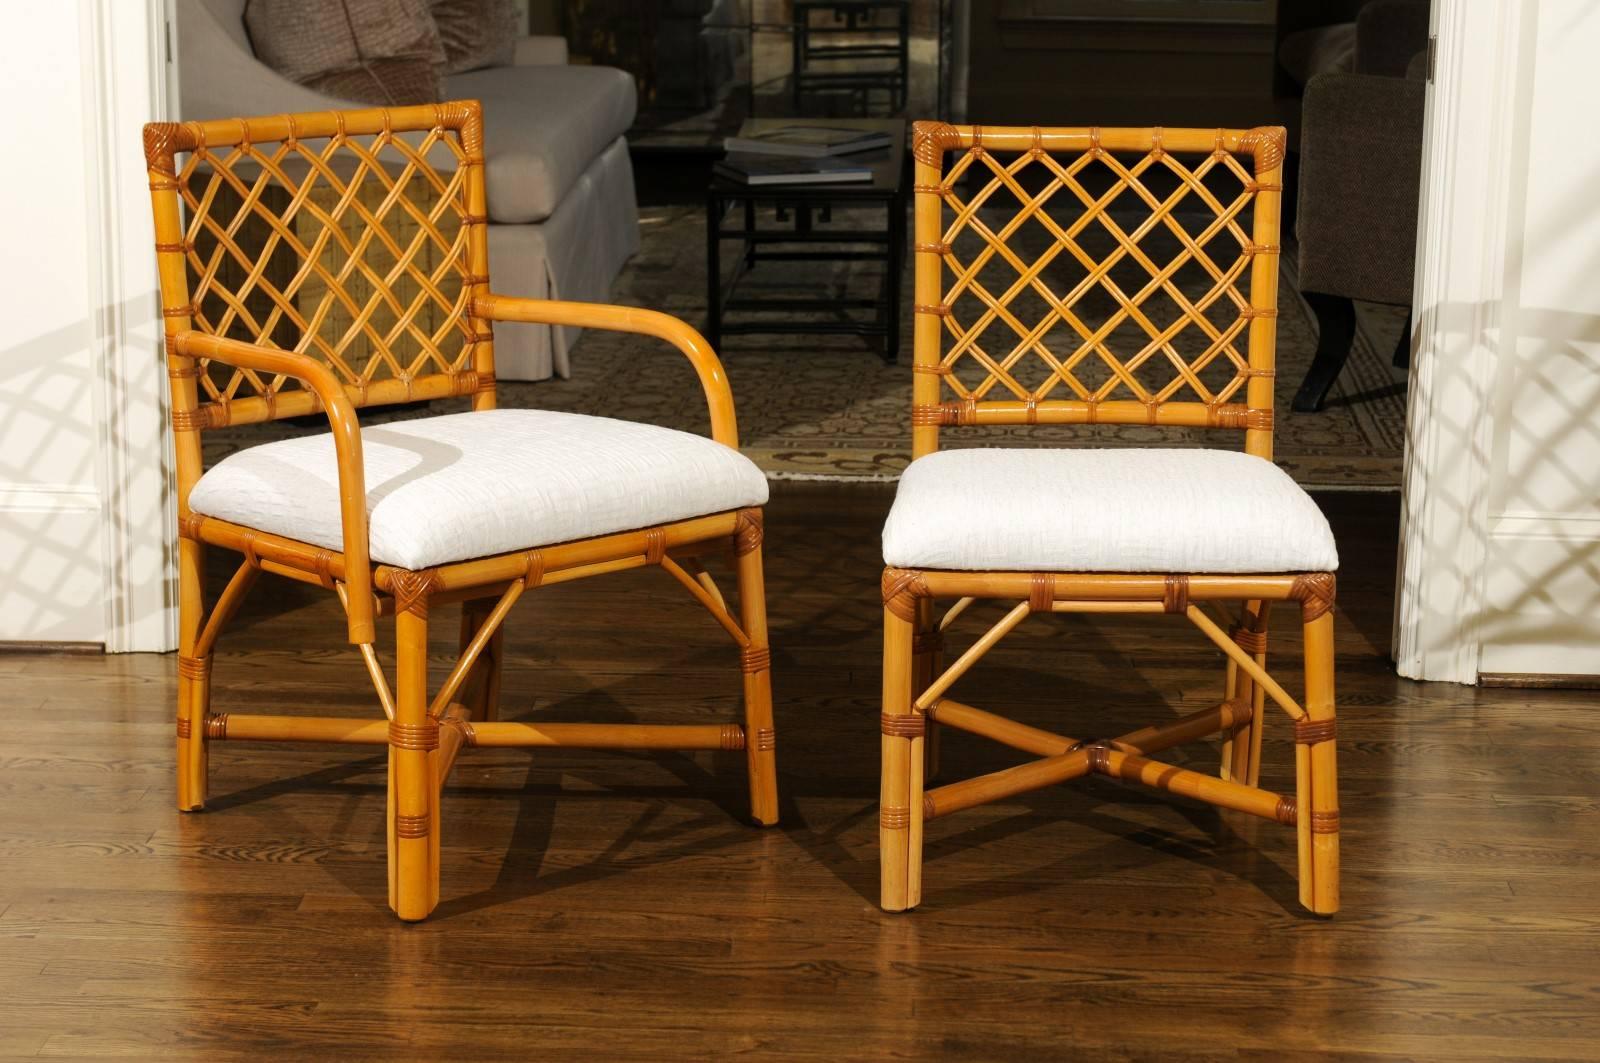 These magnificent dining chairs are shipped as professionally photographed and described in the listing narrative: Meticulously professionally restored and installation ready. Expert custom upholstery service is available.

A stellar set of eight